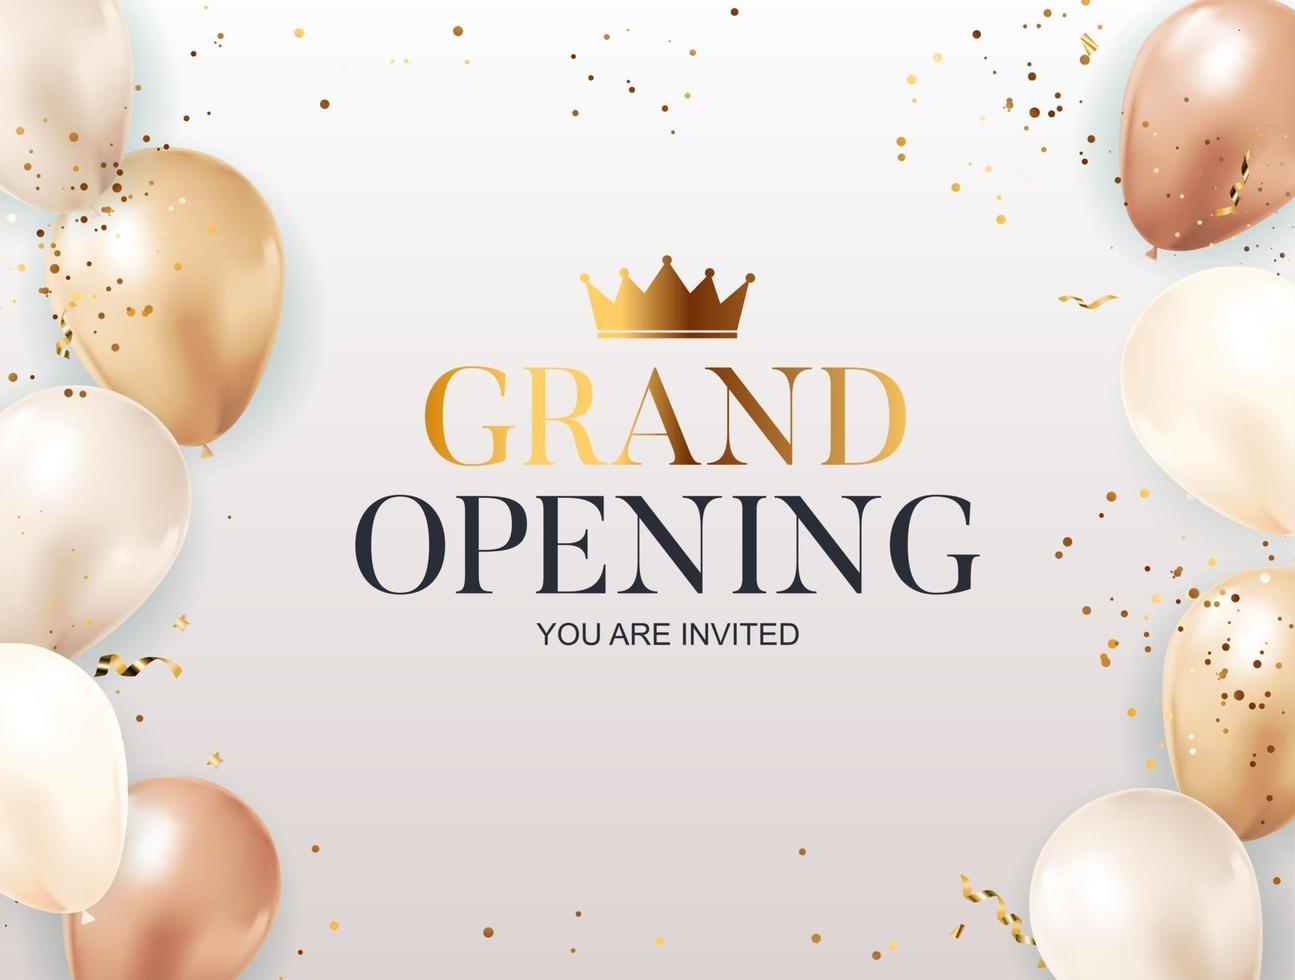 Grand Opening congratulation background card with confettis vector